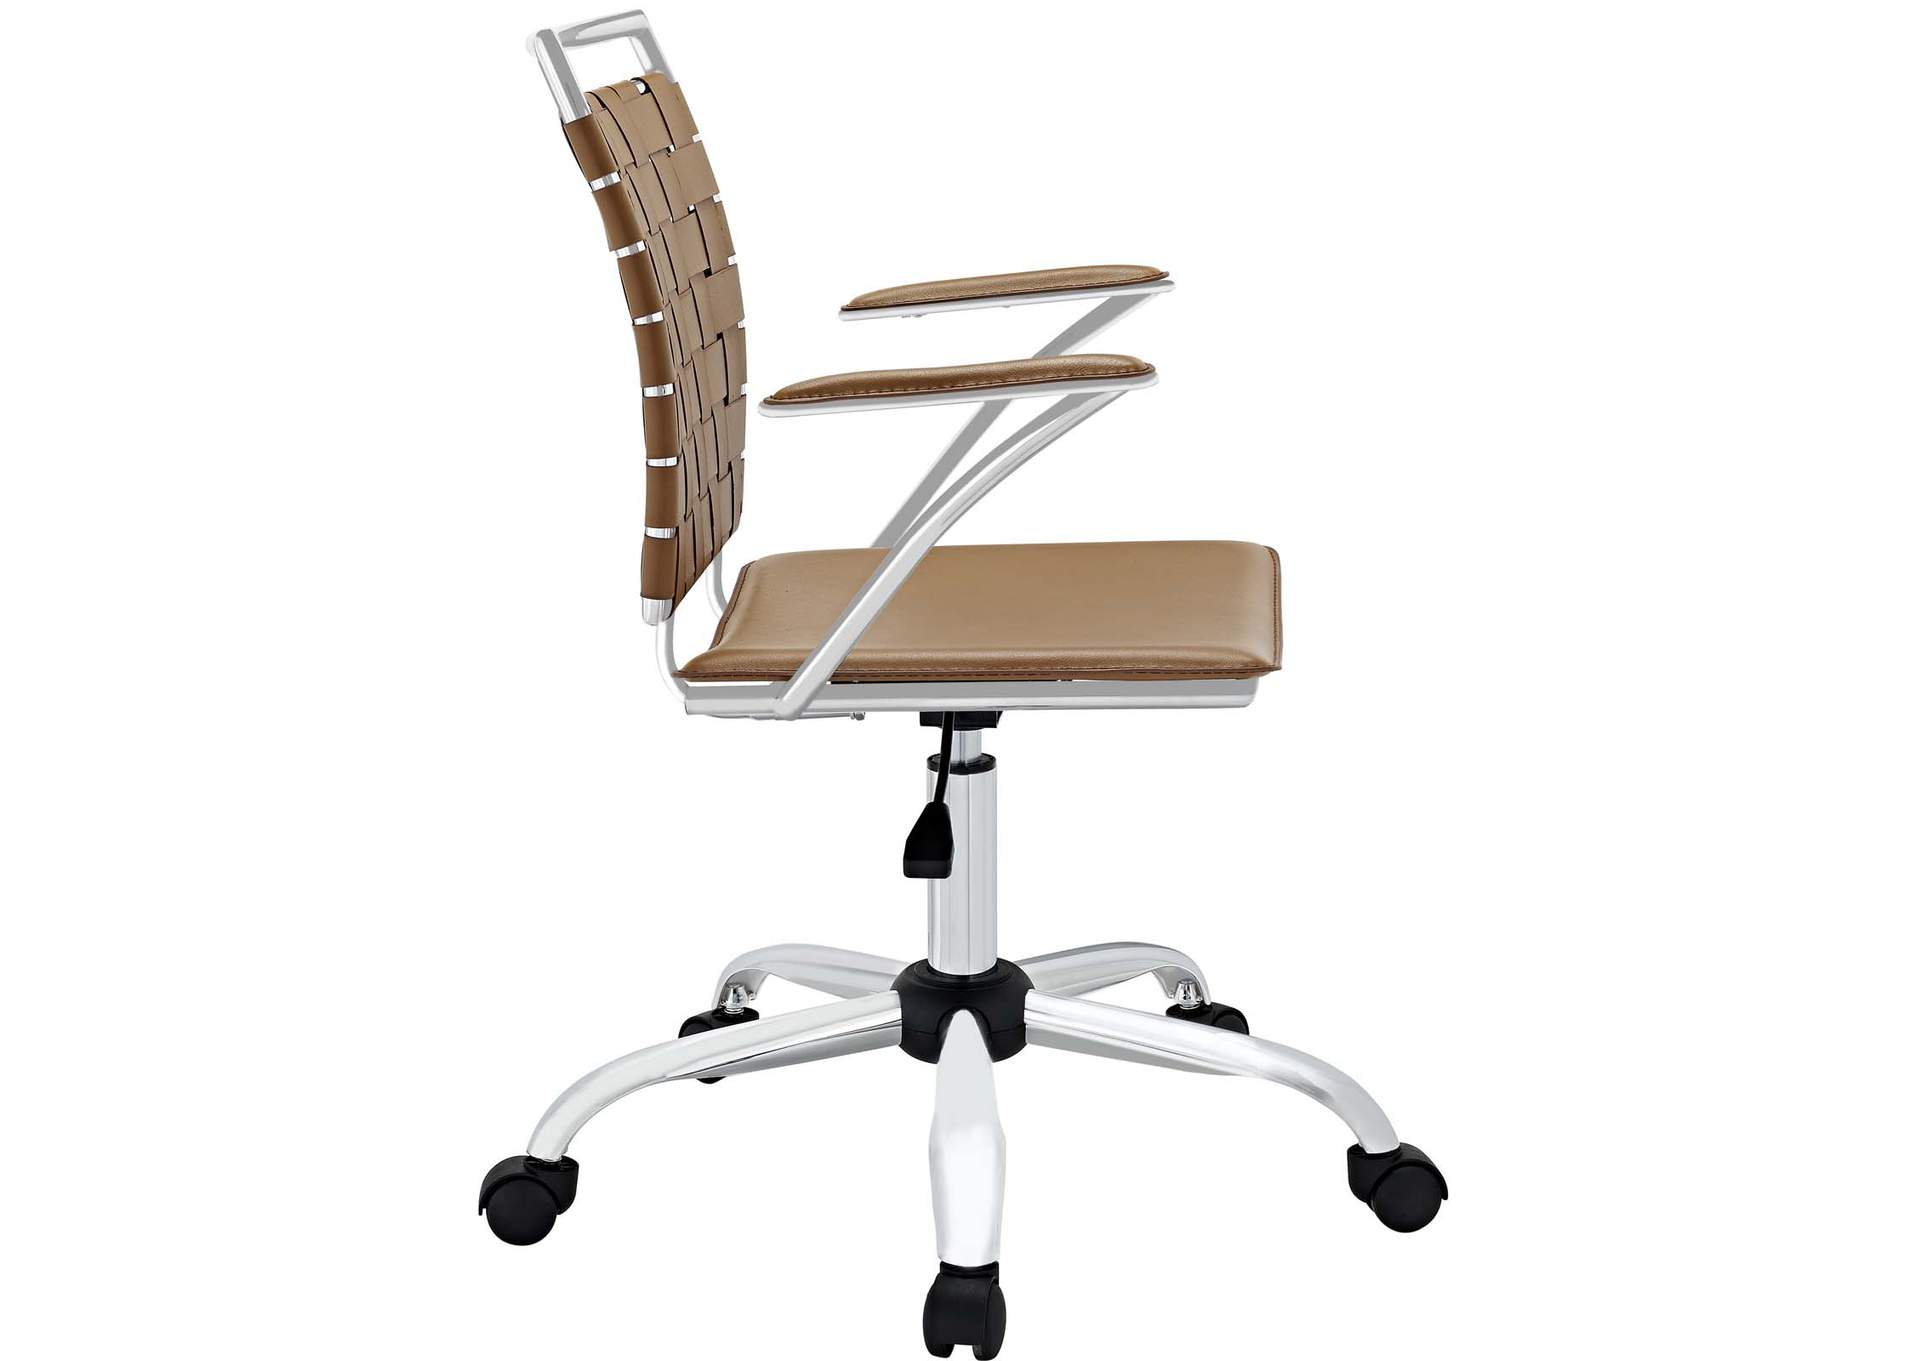 Tan Fuse Office Chair,Modway